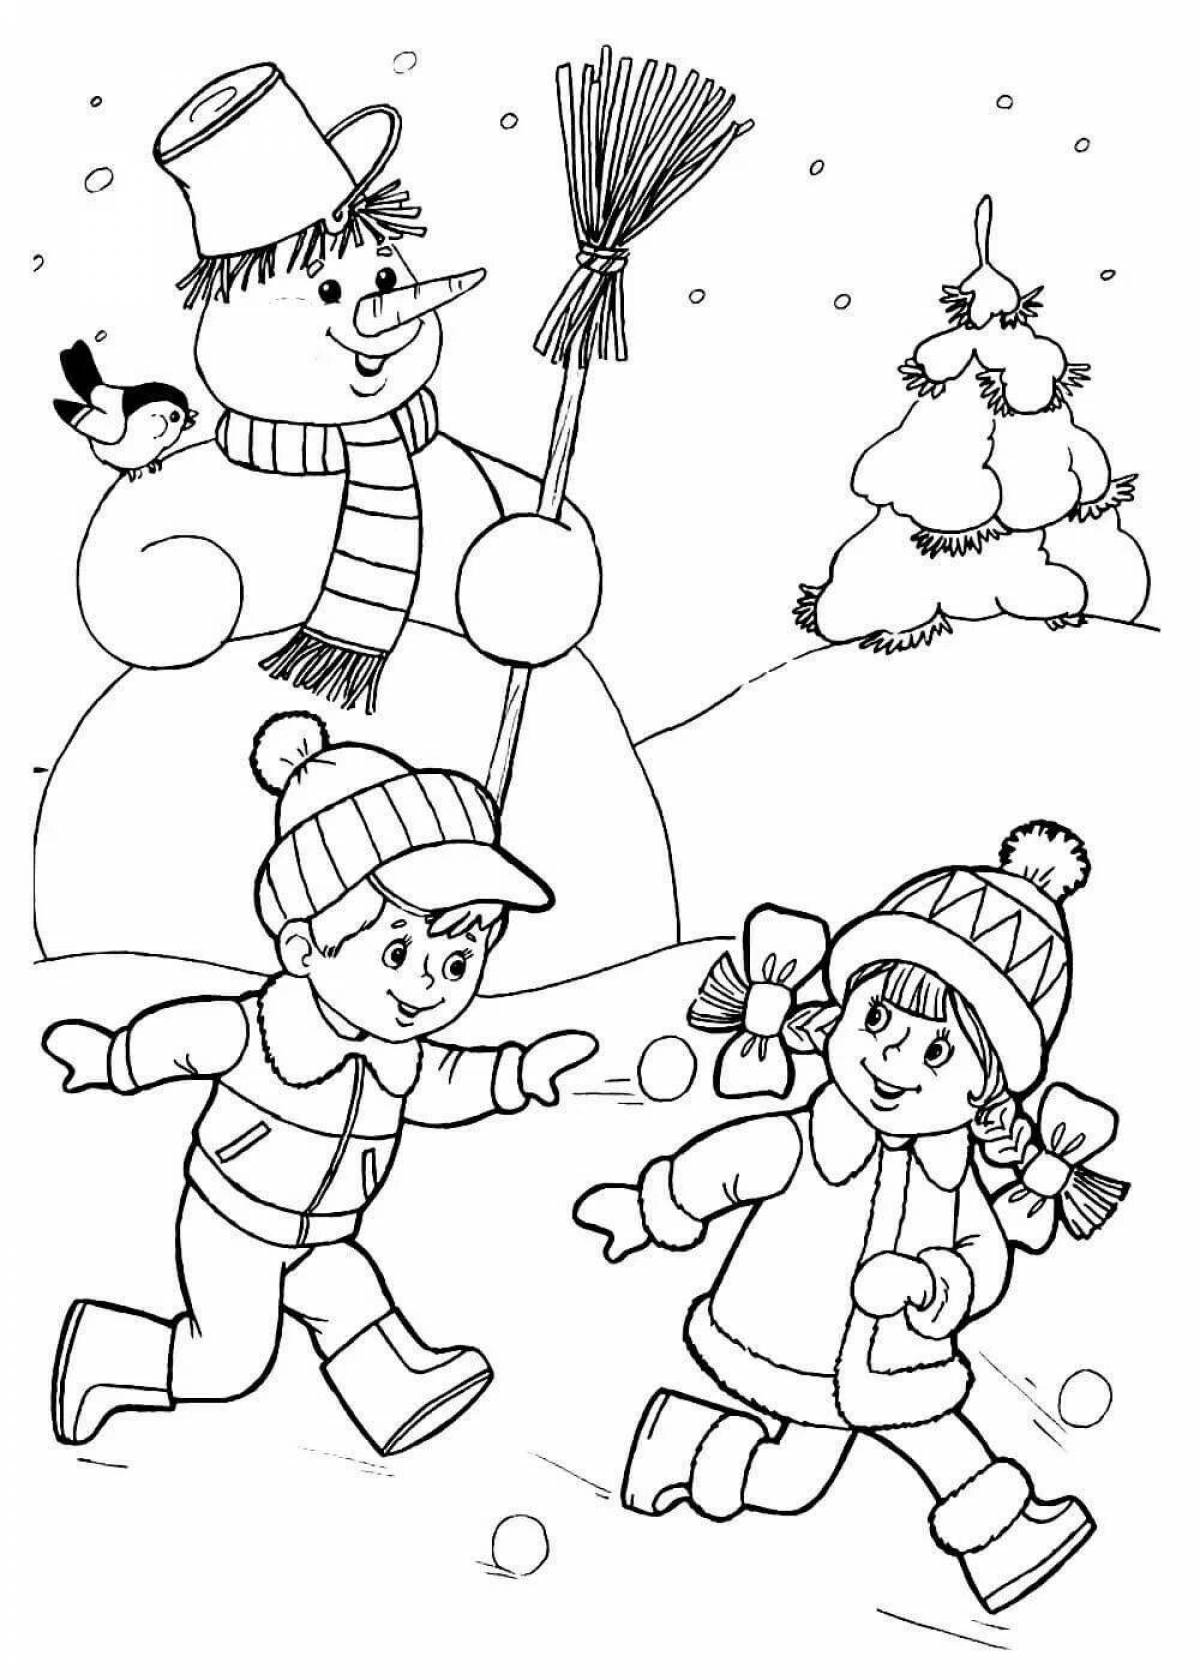 Fun winter games coloring page